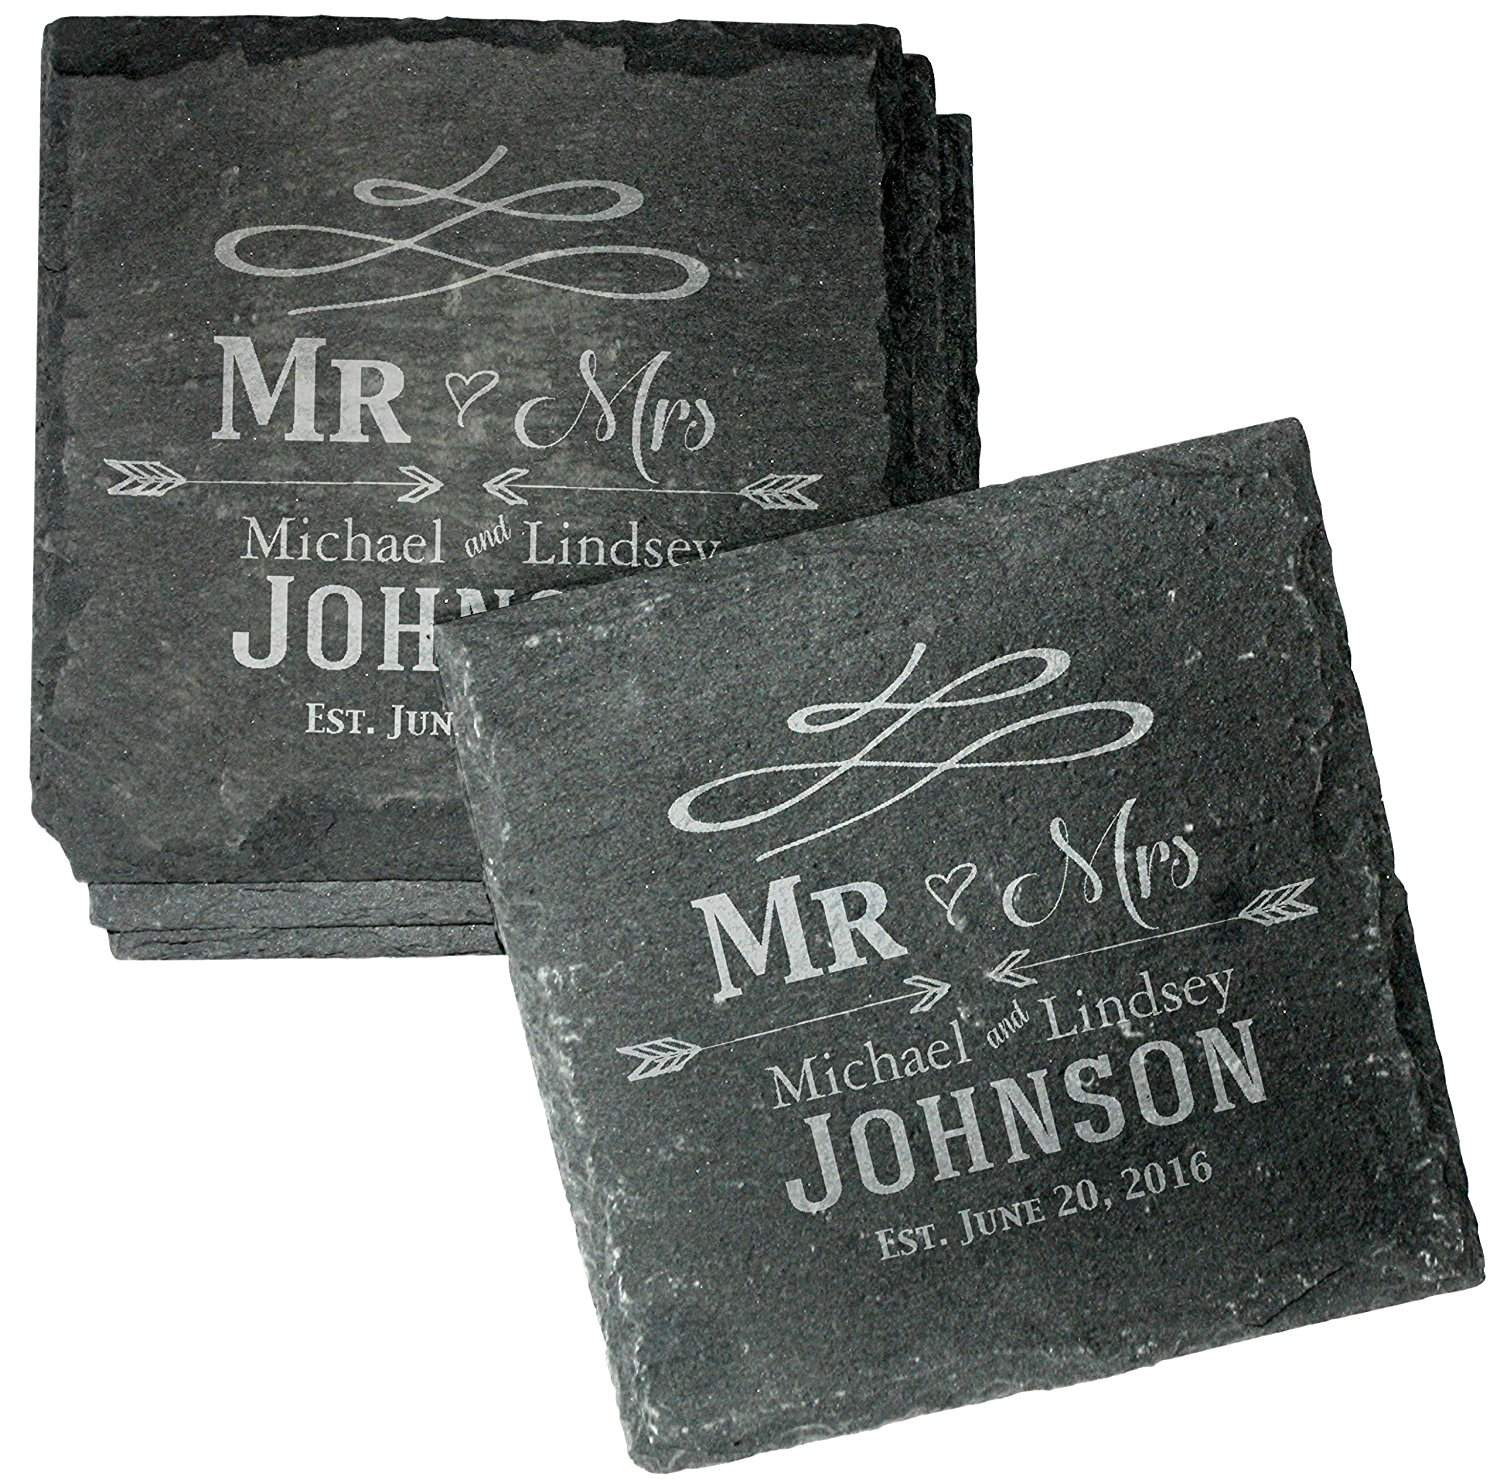 Wedding Gift Engraving Ideas
 Top 20 Best Personalized Wedding Gifts